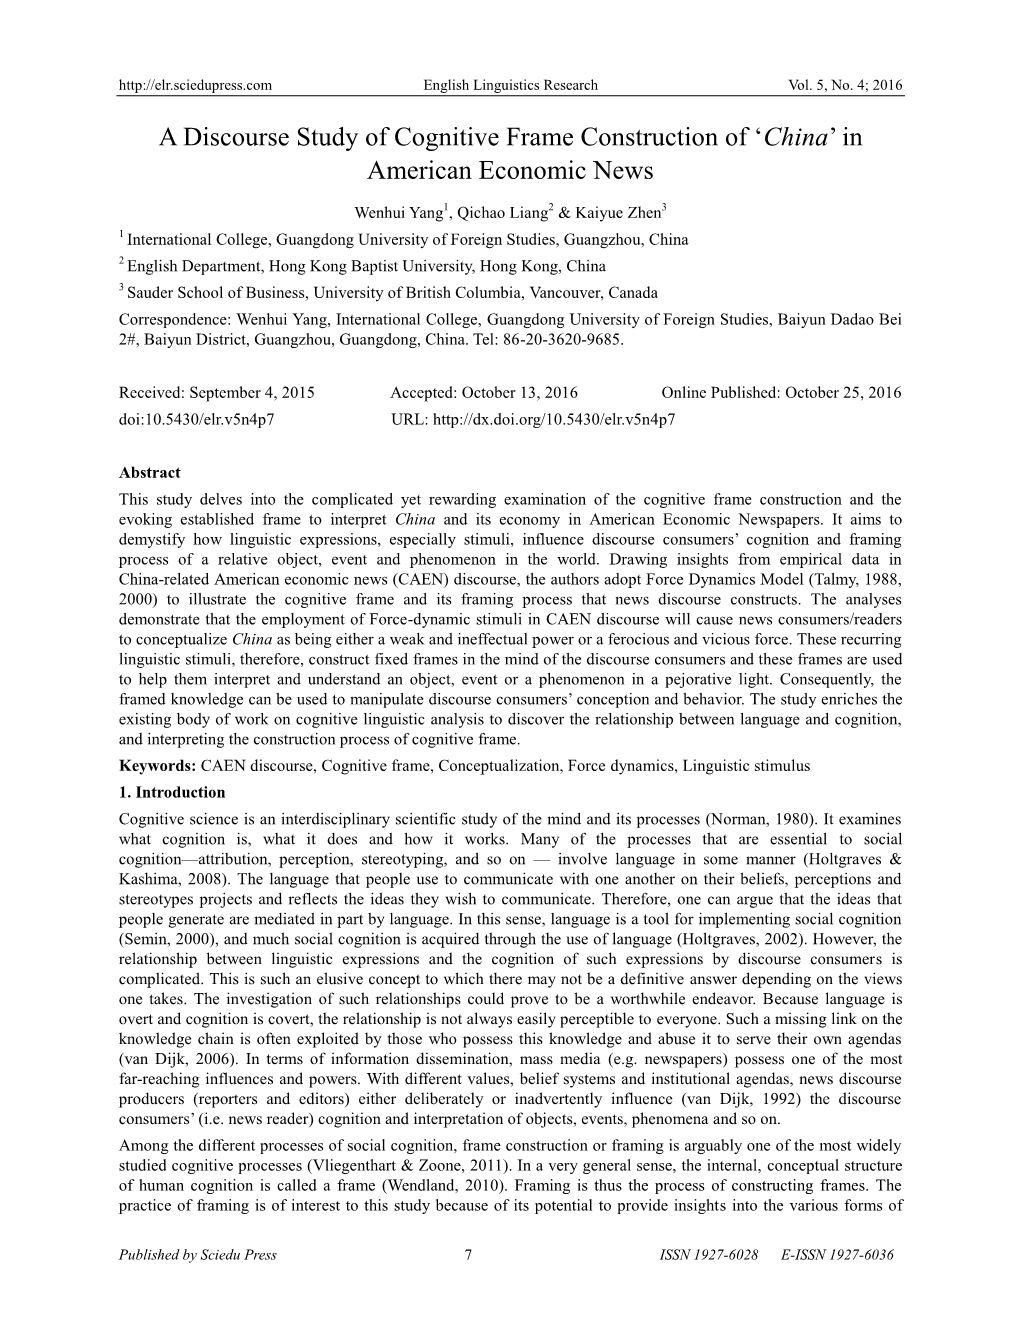 A Discourse Study of Cognitive Frame Construction of ‘China’ in American Economic News